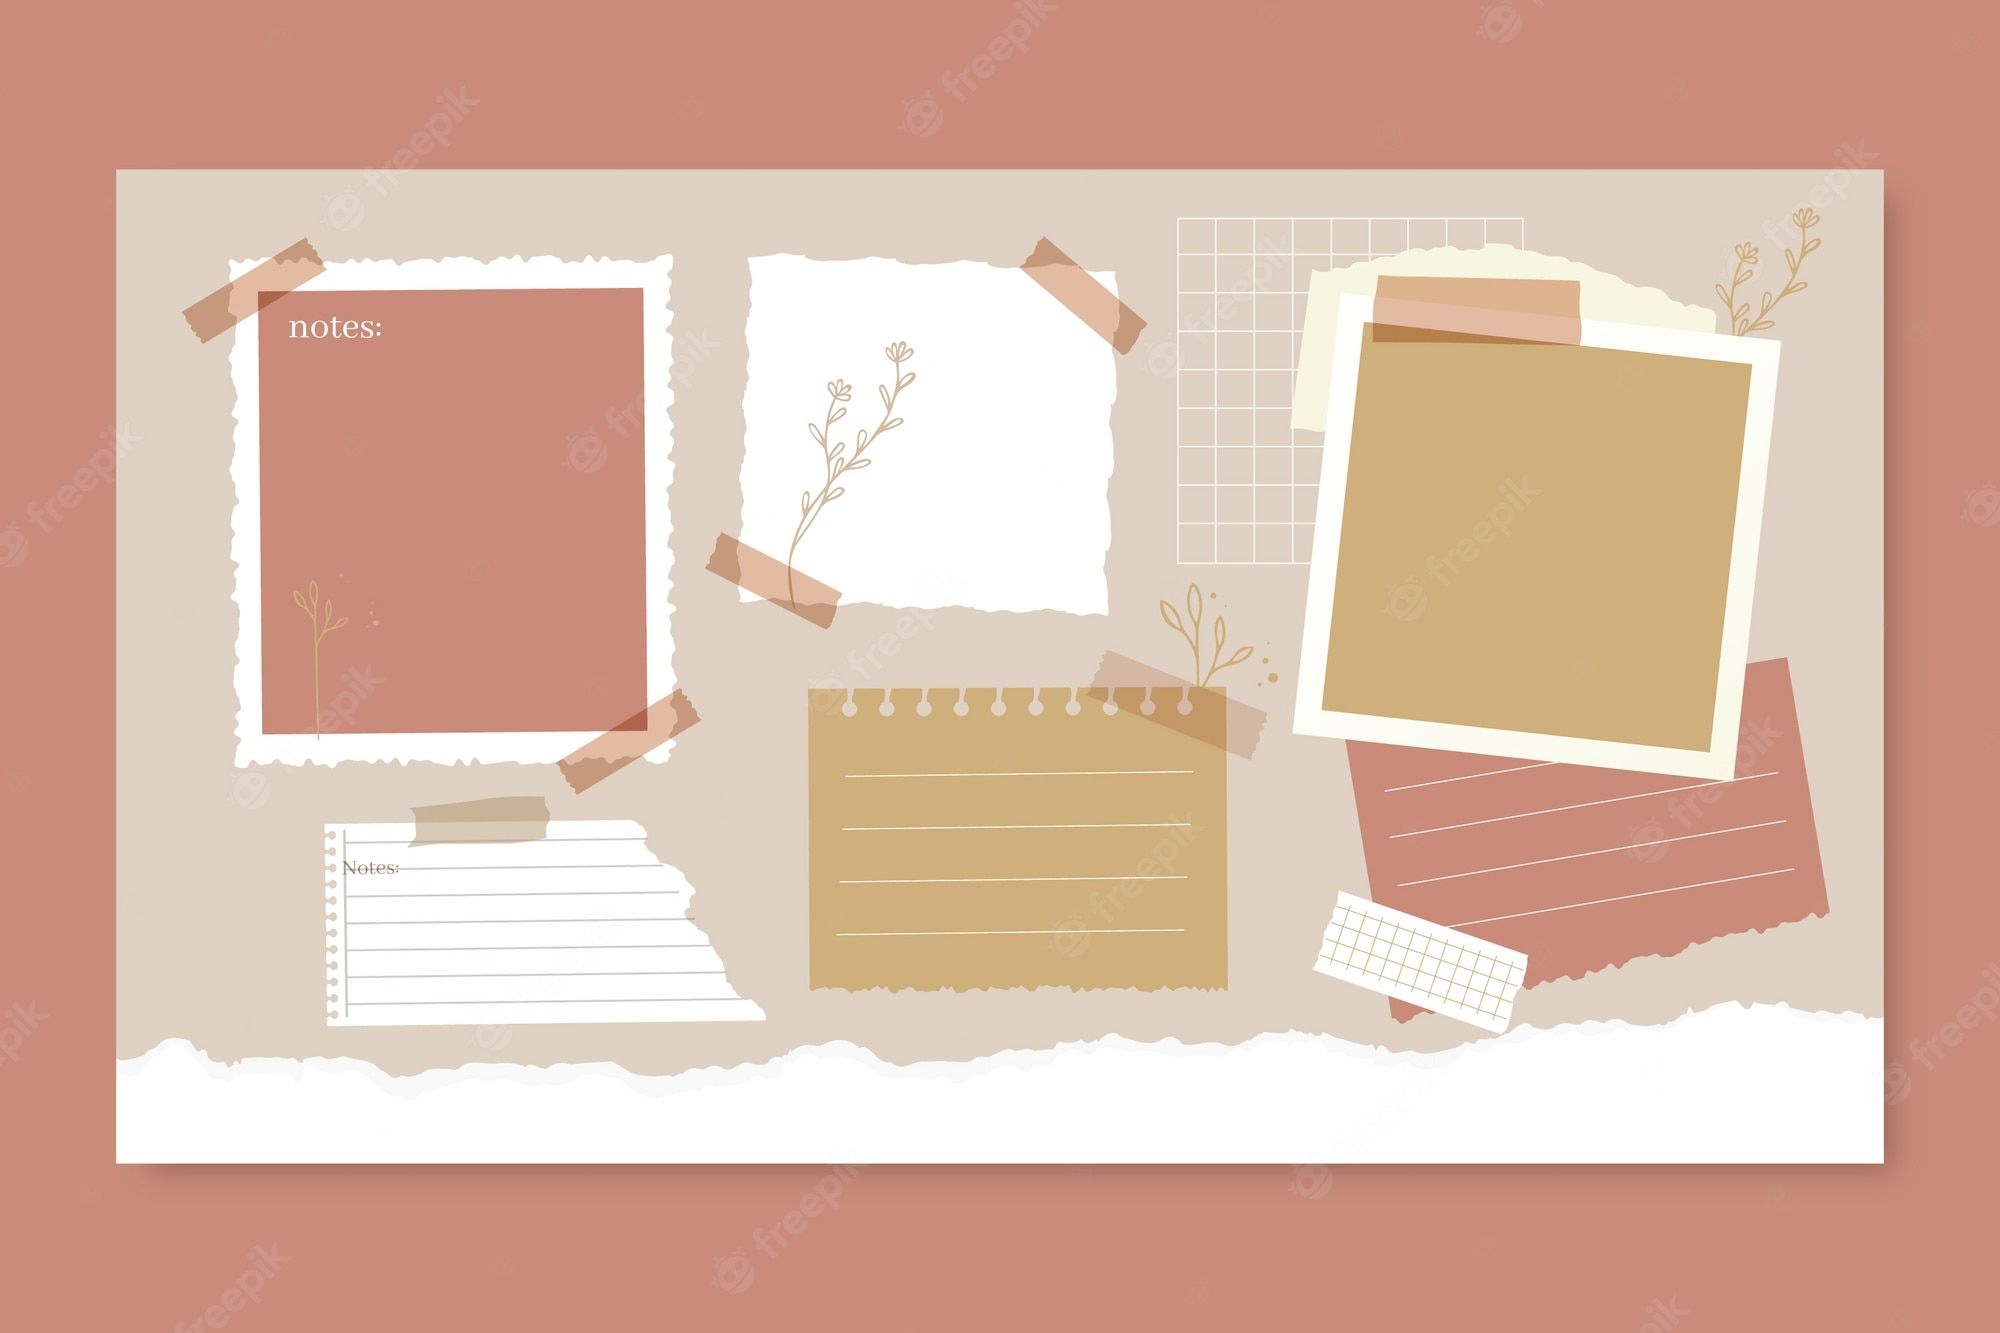 A set of torn paper notes with a brown and white color scheme - Study, The Office